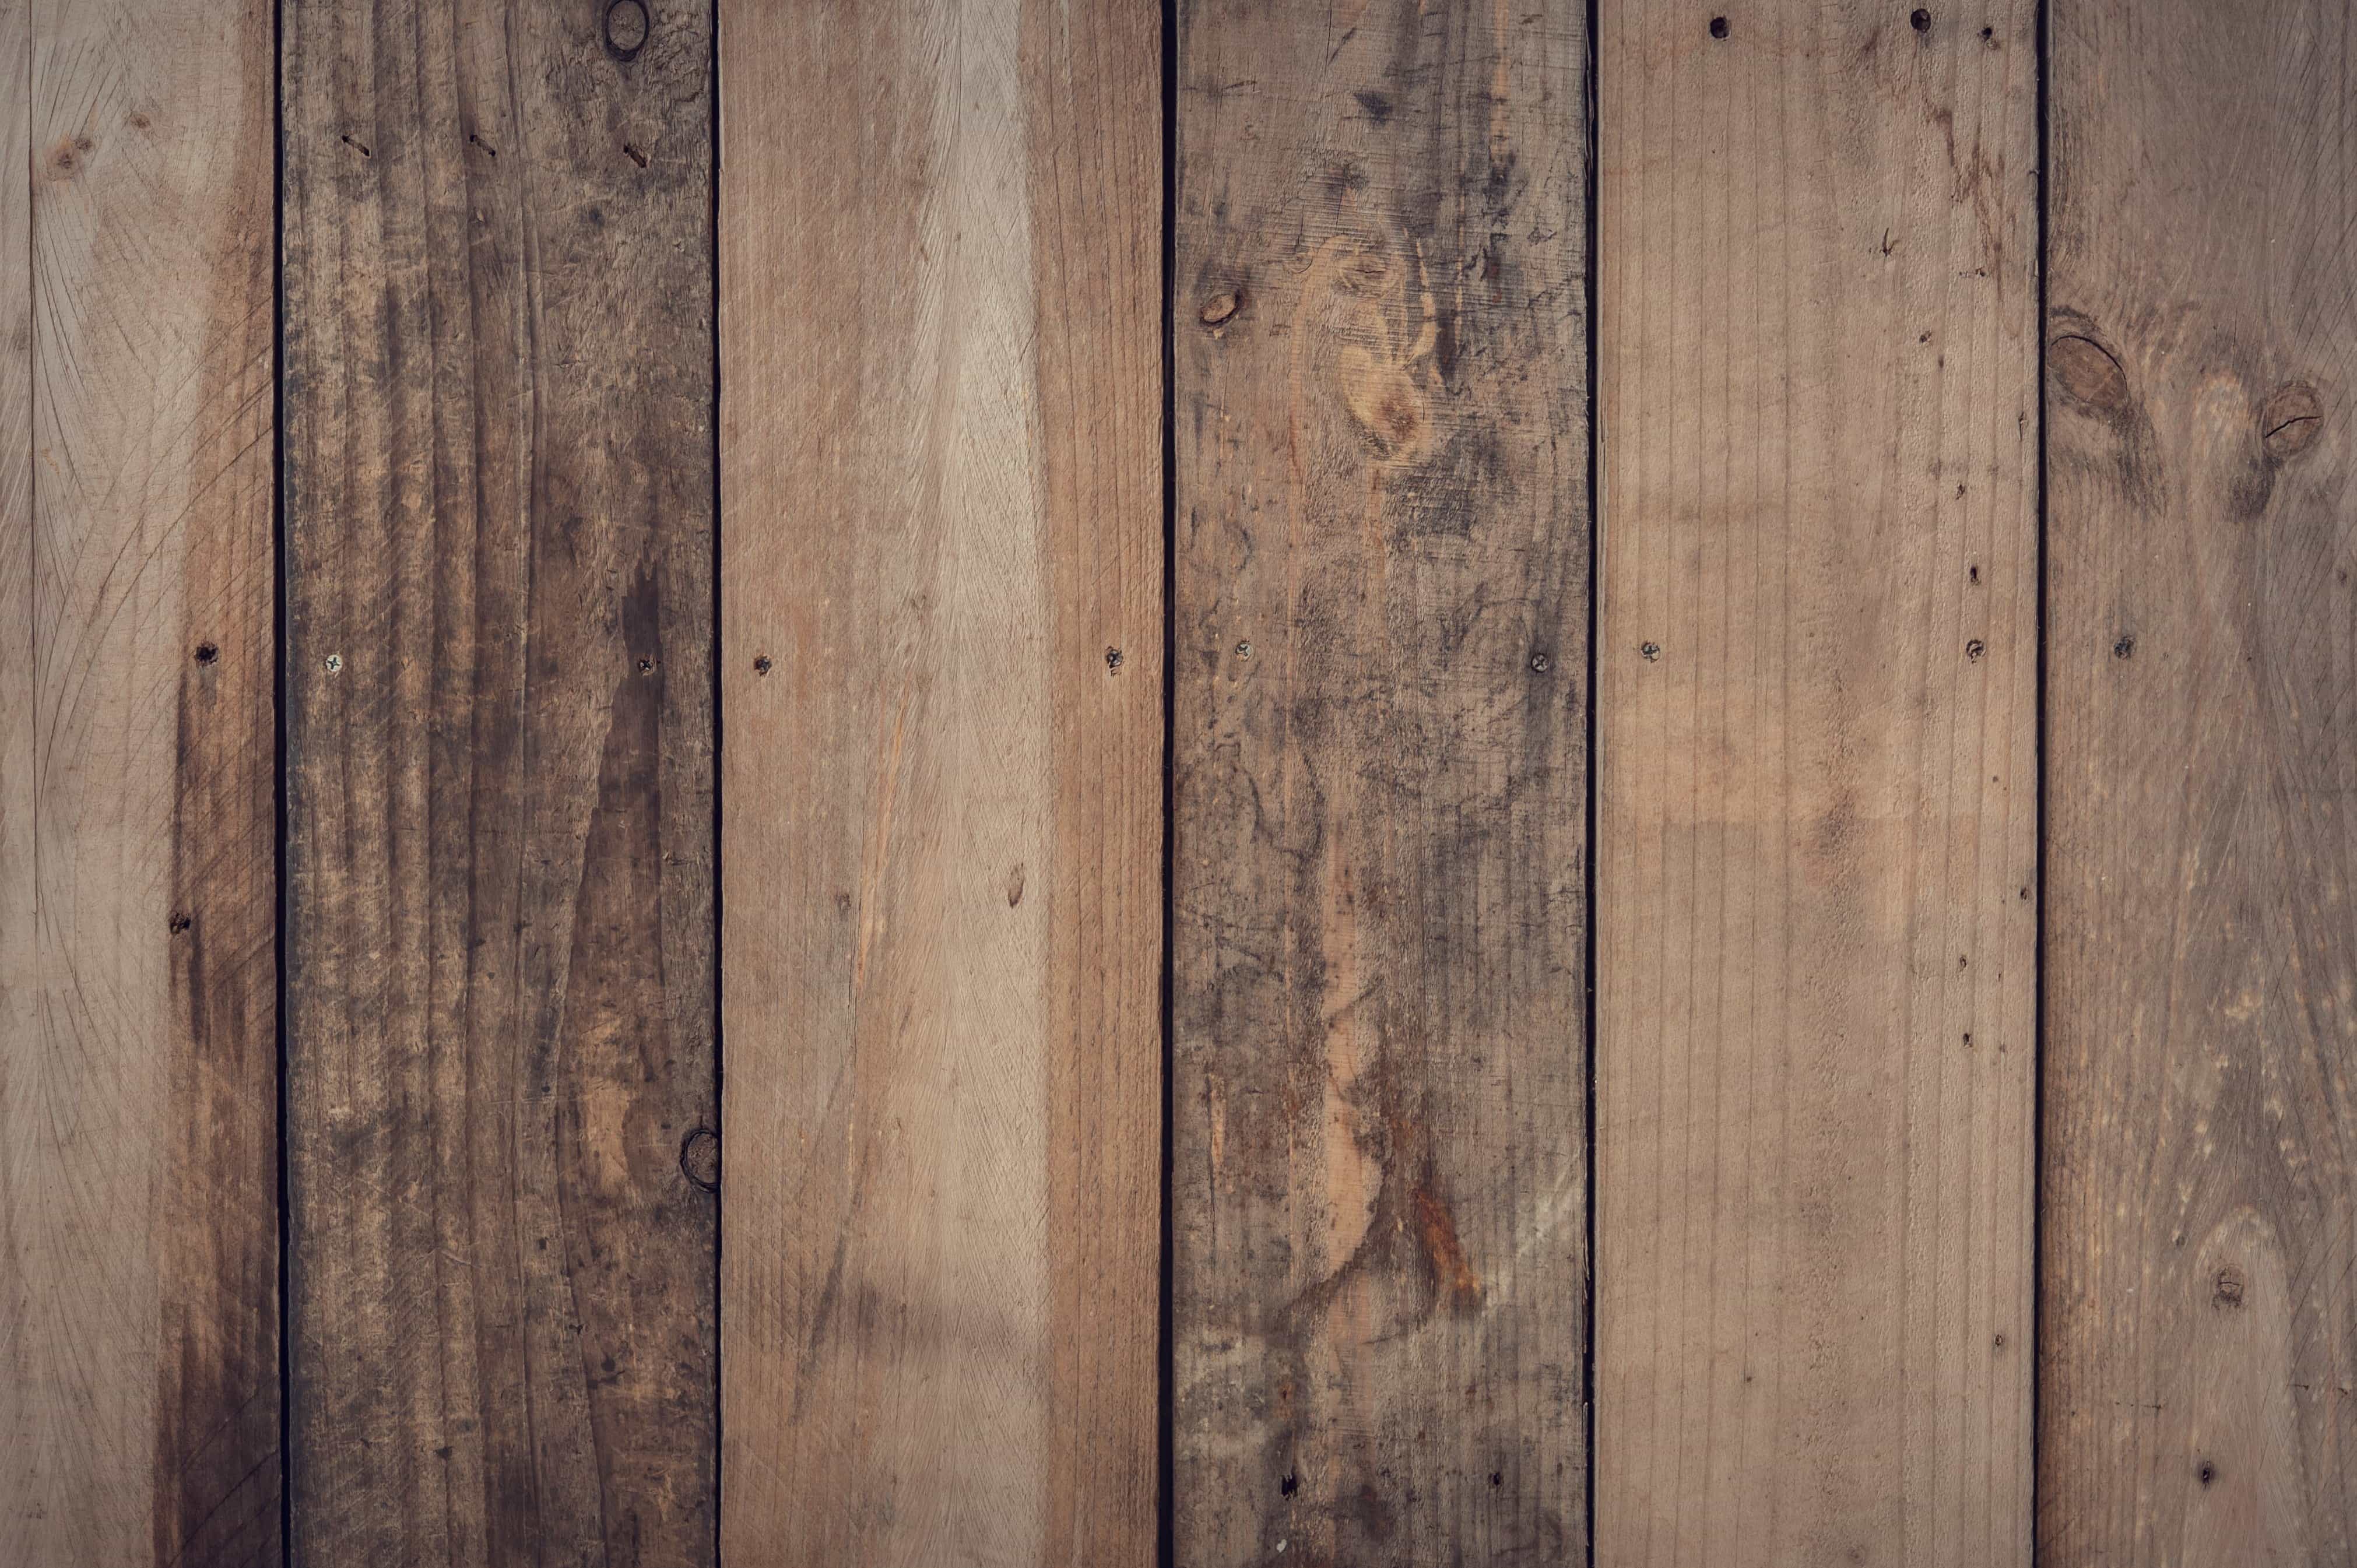 Free picture: wooden, hardwood, surface, wood, carpentry, floor